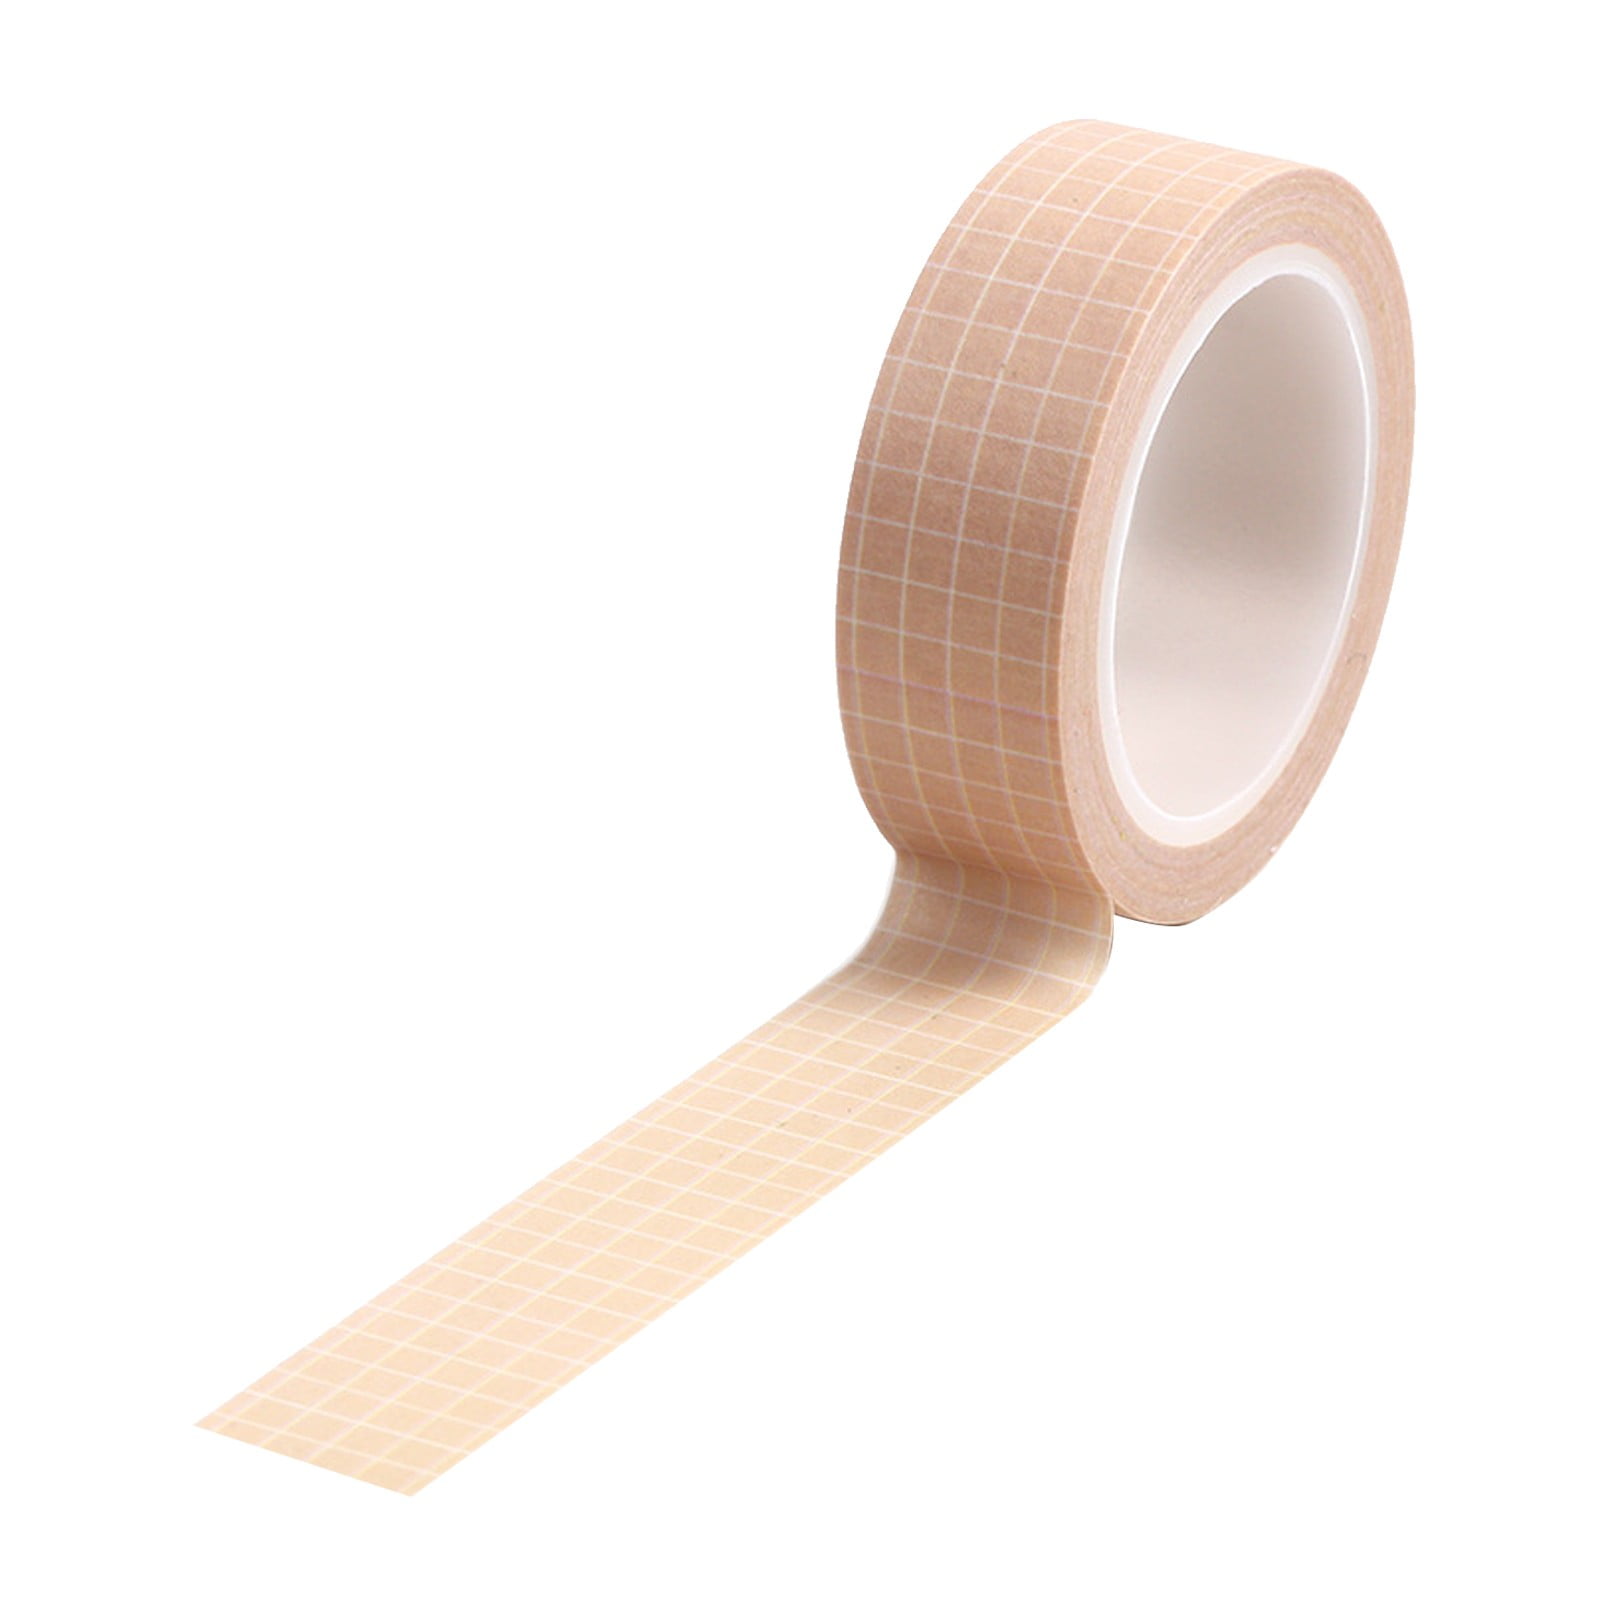 Grid Paper Tape Decorative Stickers Grid Material Tape For School Supplies  Border Box Decoration Foam Adhesive Strips Double Sided